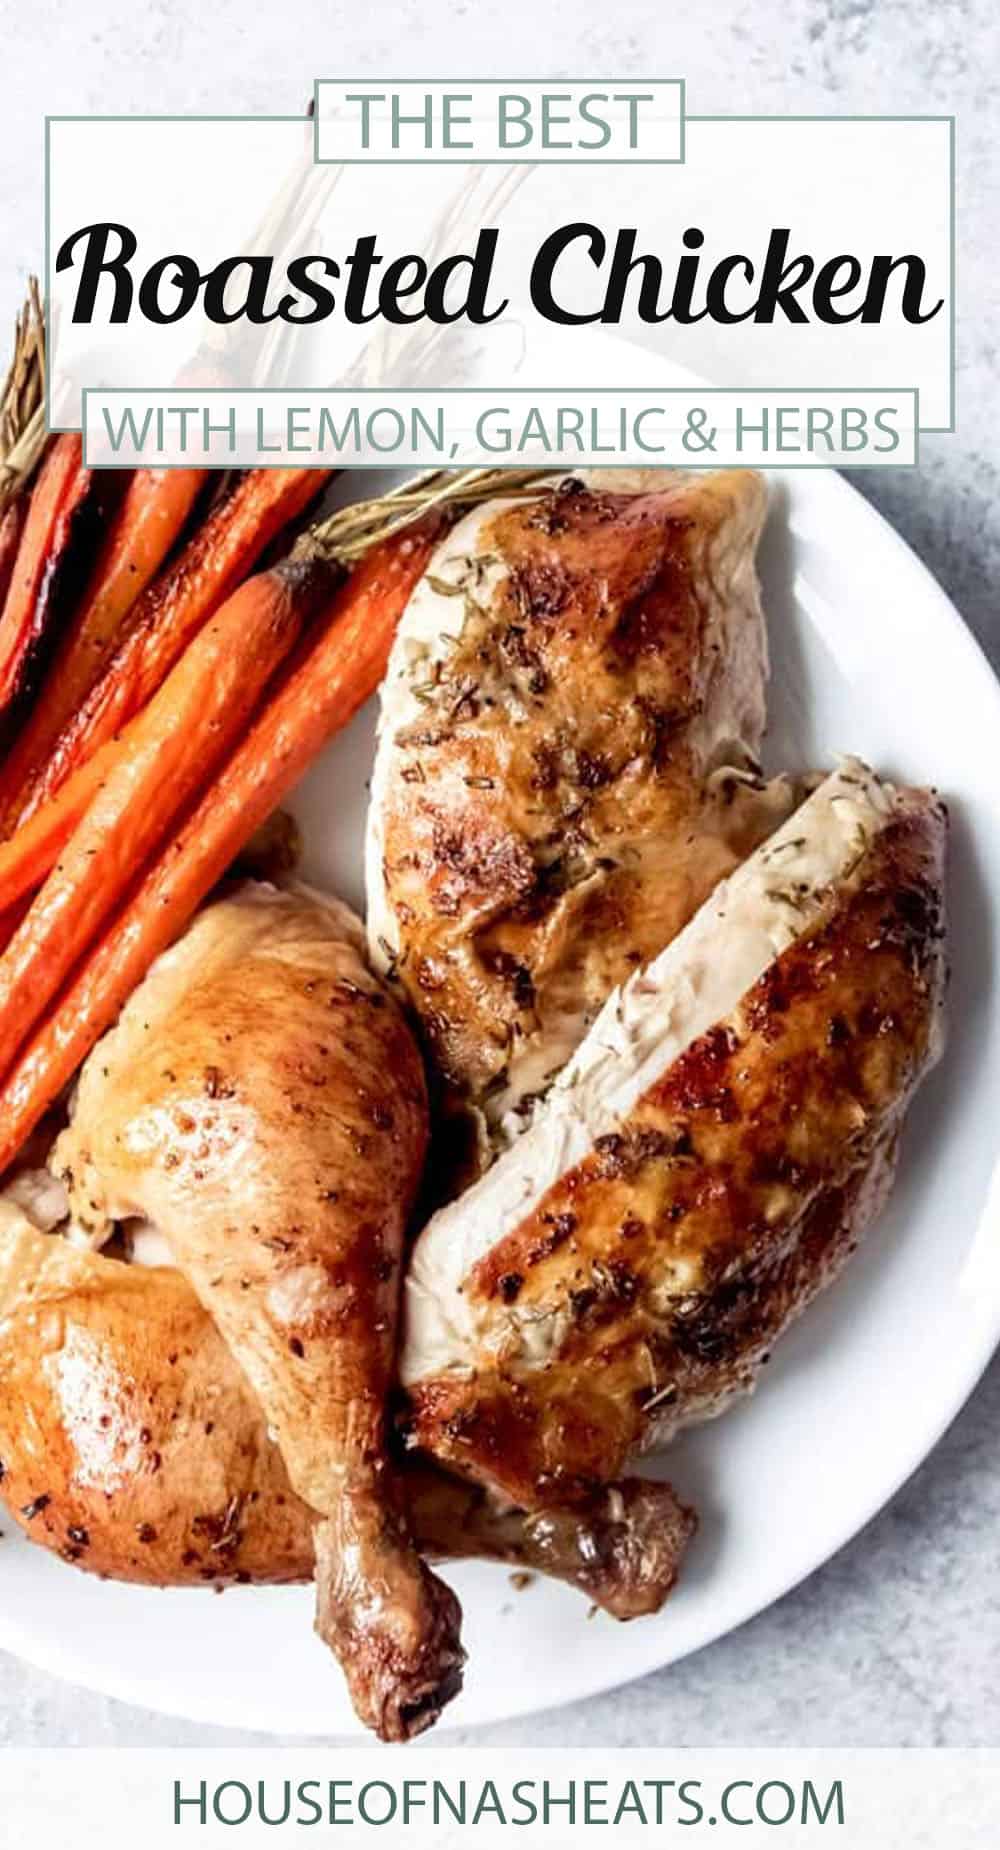 My Best Slow Roasted Chicken Recipe - House of Nash Eats